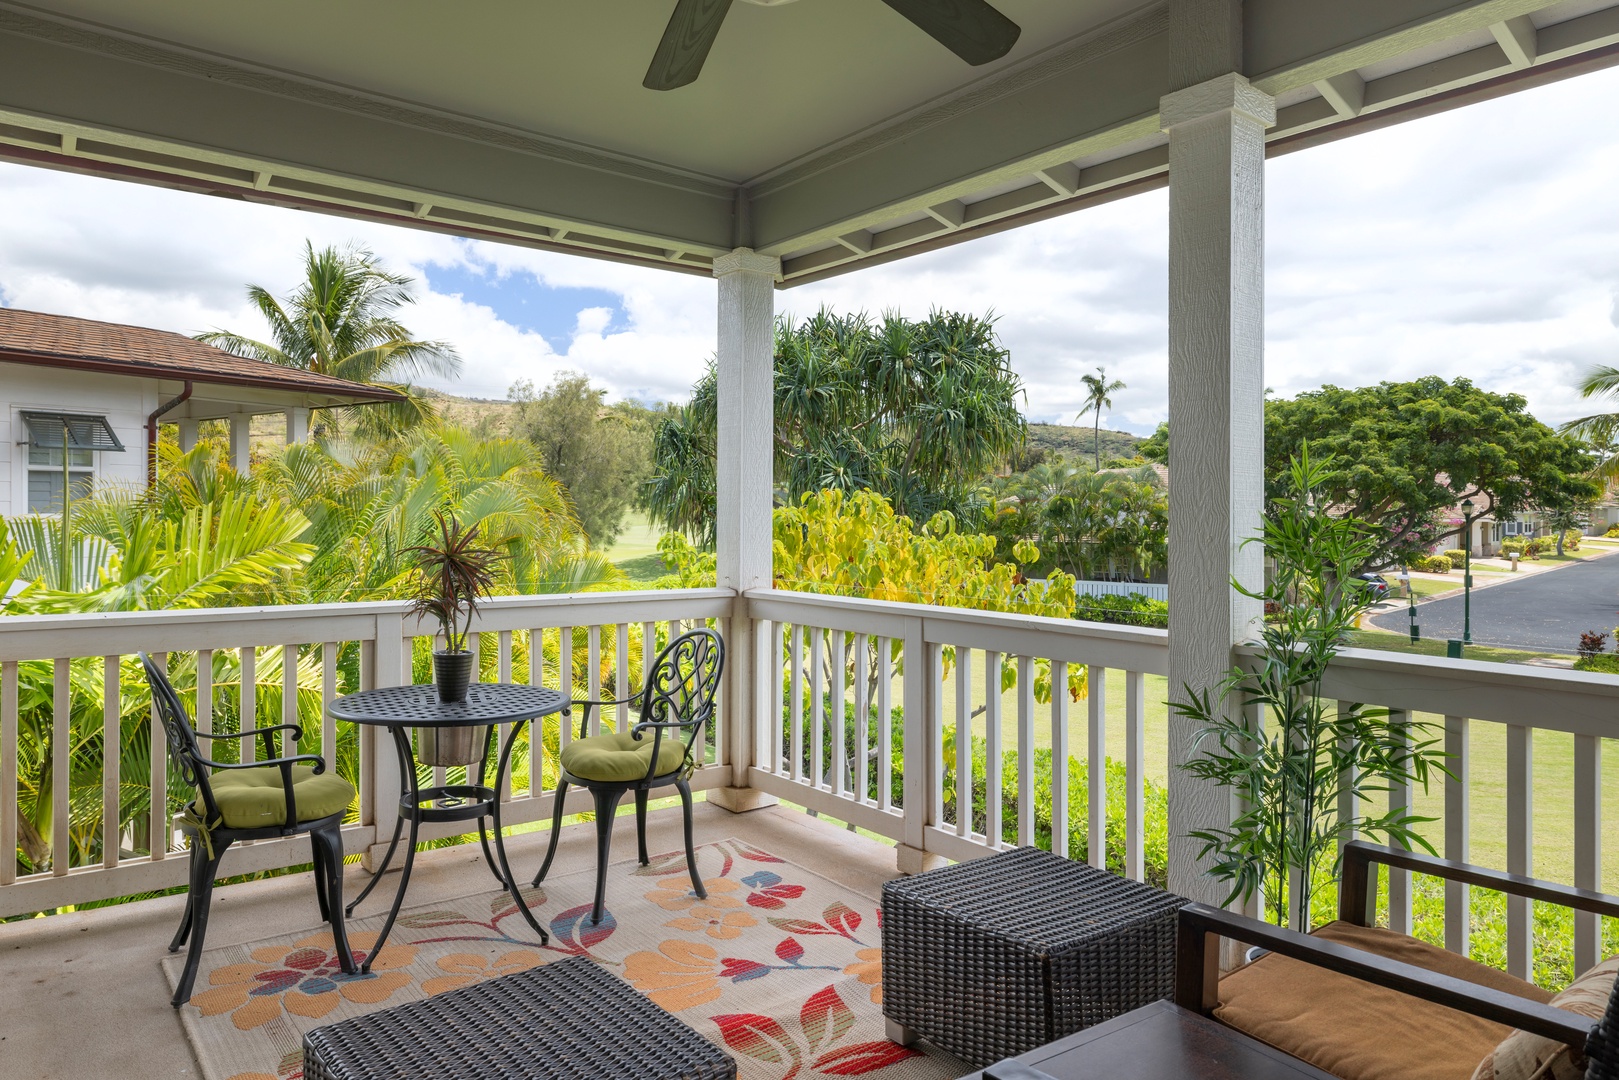 Kapolei Vacation Rentals, Coconut Plantation 1190-1 - Enjoy your morning coffee on the lanai with a view.